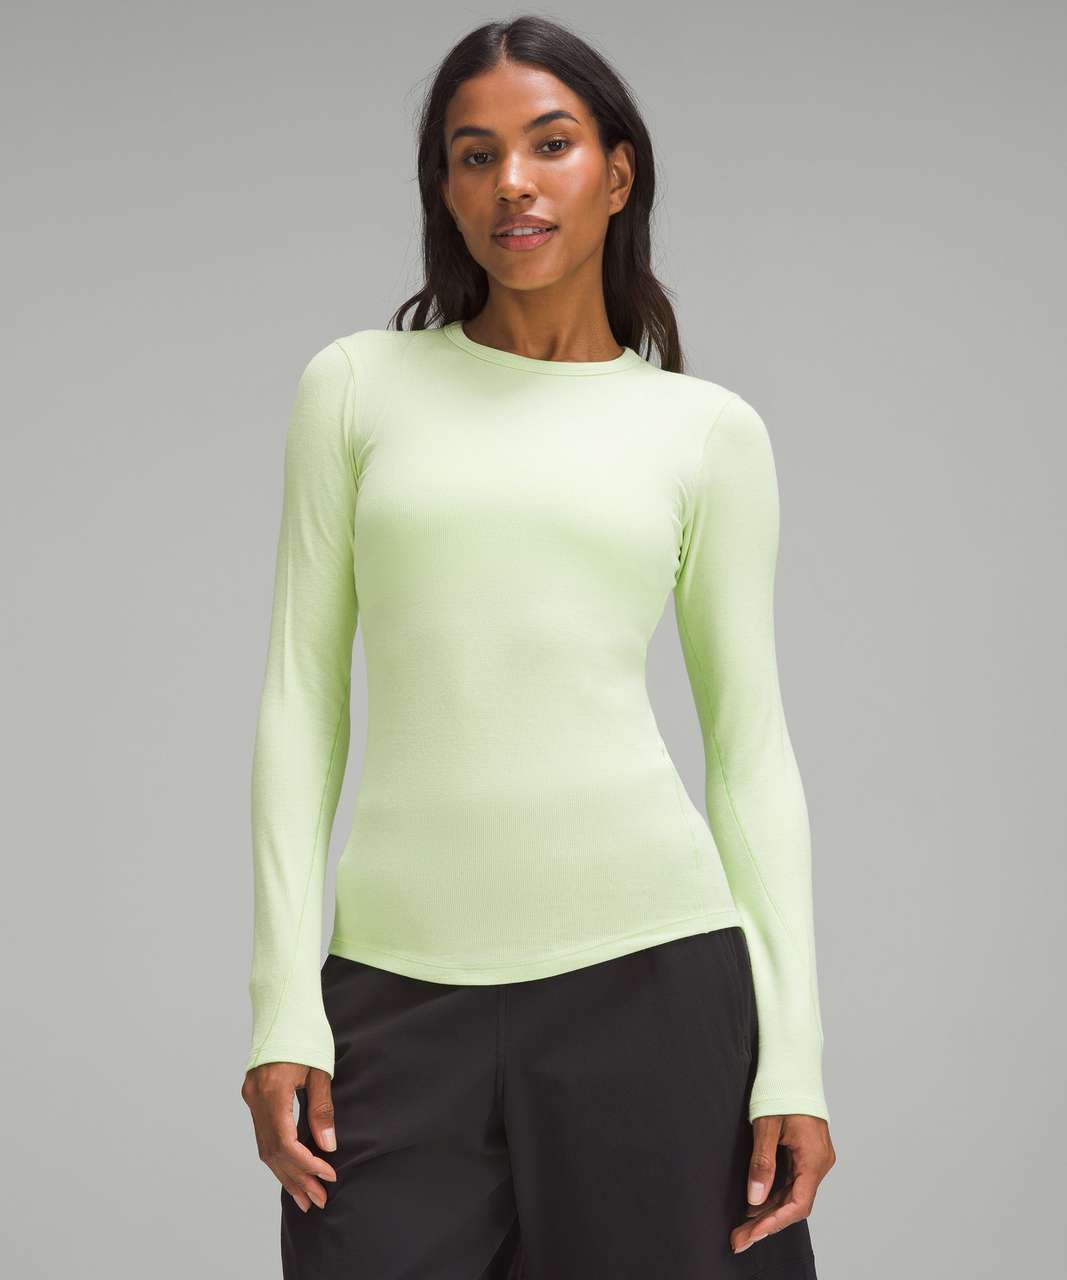 Lululemon Align T-Shirt Green Size 12 - $30 (55% Off Retail) New With Tags  - From Callie